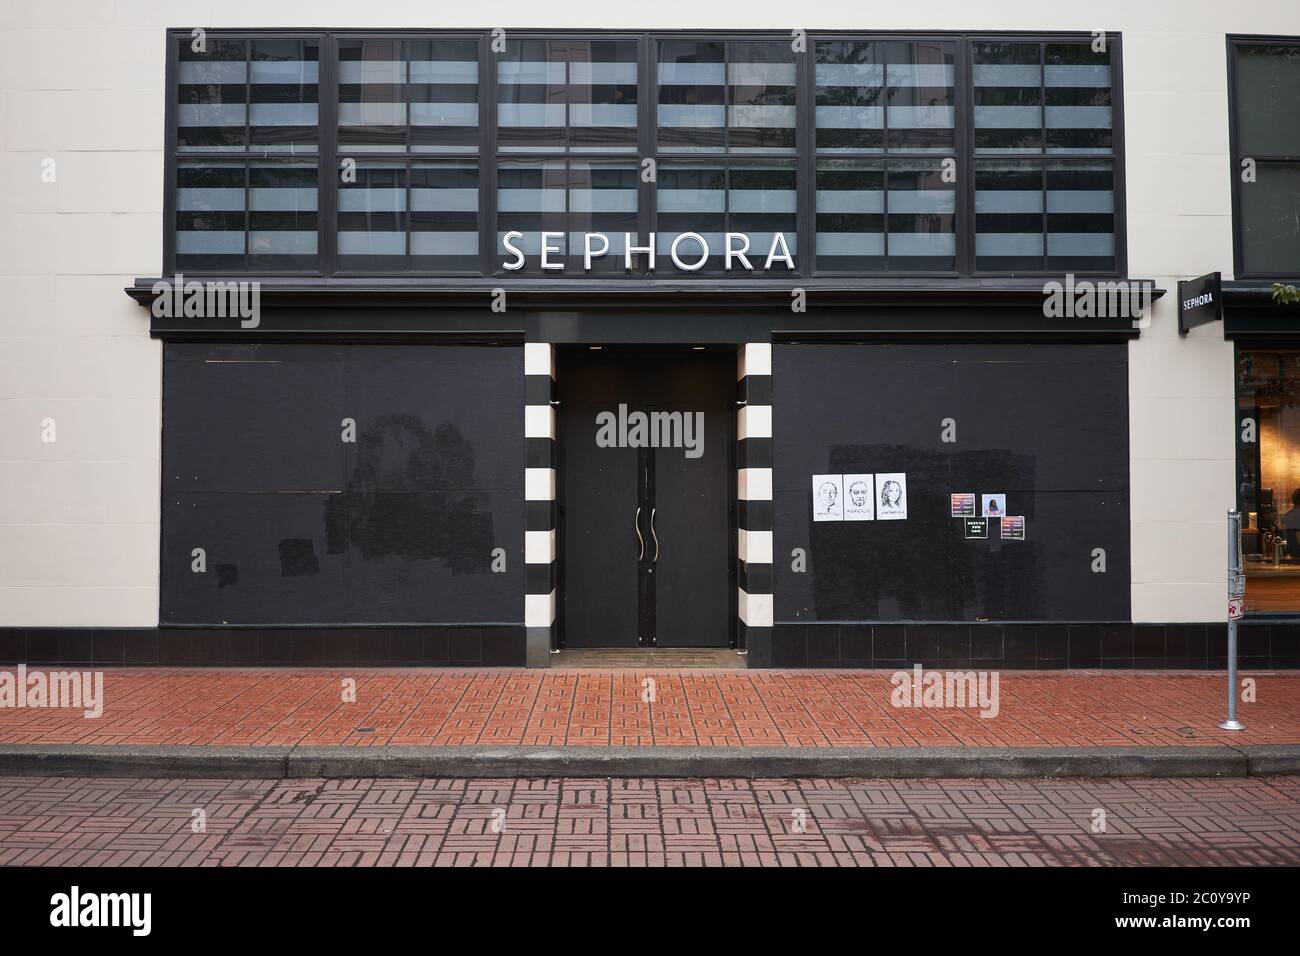 The Sephora store in downtown Portland, Oregon, is seen boarded up to protect from further damage amid the protest, on Friday, Jun 12, 2020. Stock Photo